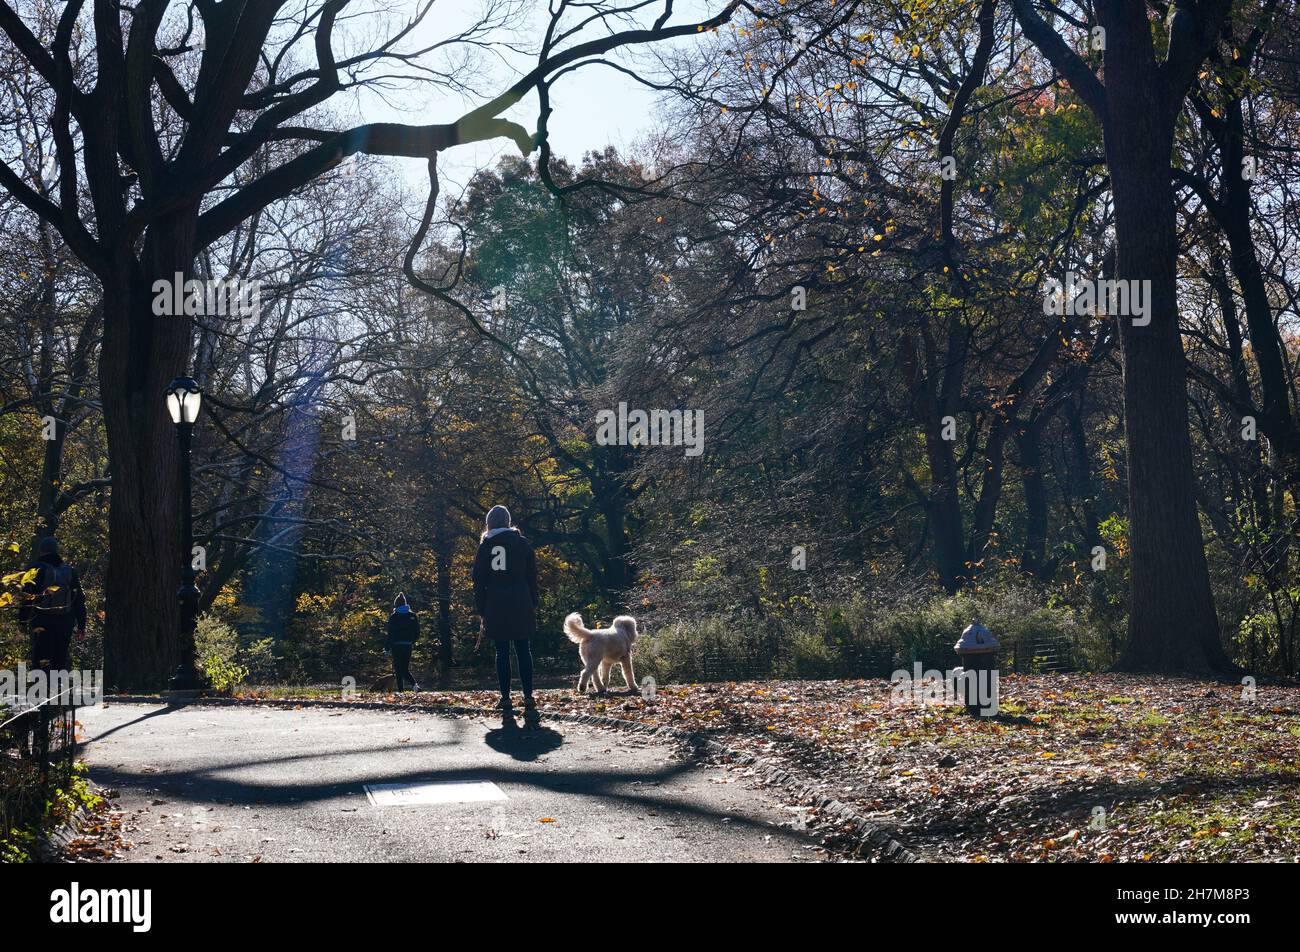 Walkers in Central Park on a sunny fall morning, as leaves are falling and trees are turning colors. Stock Photo